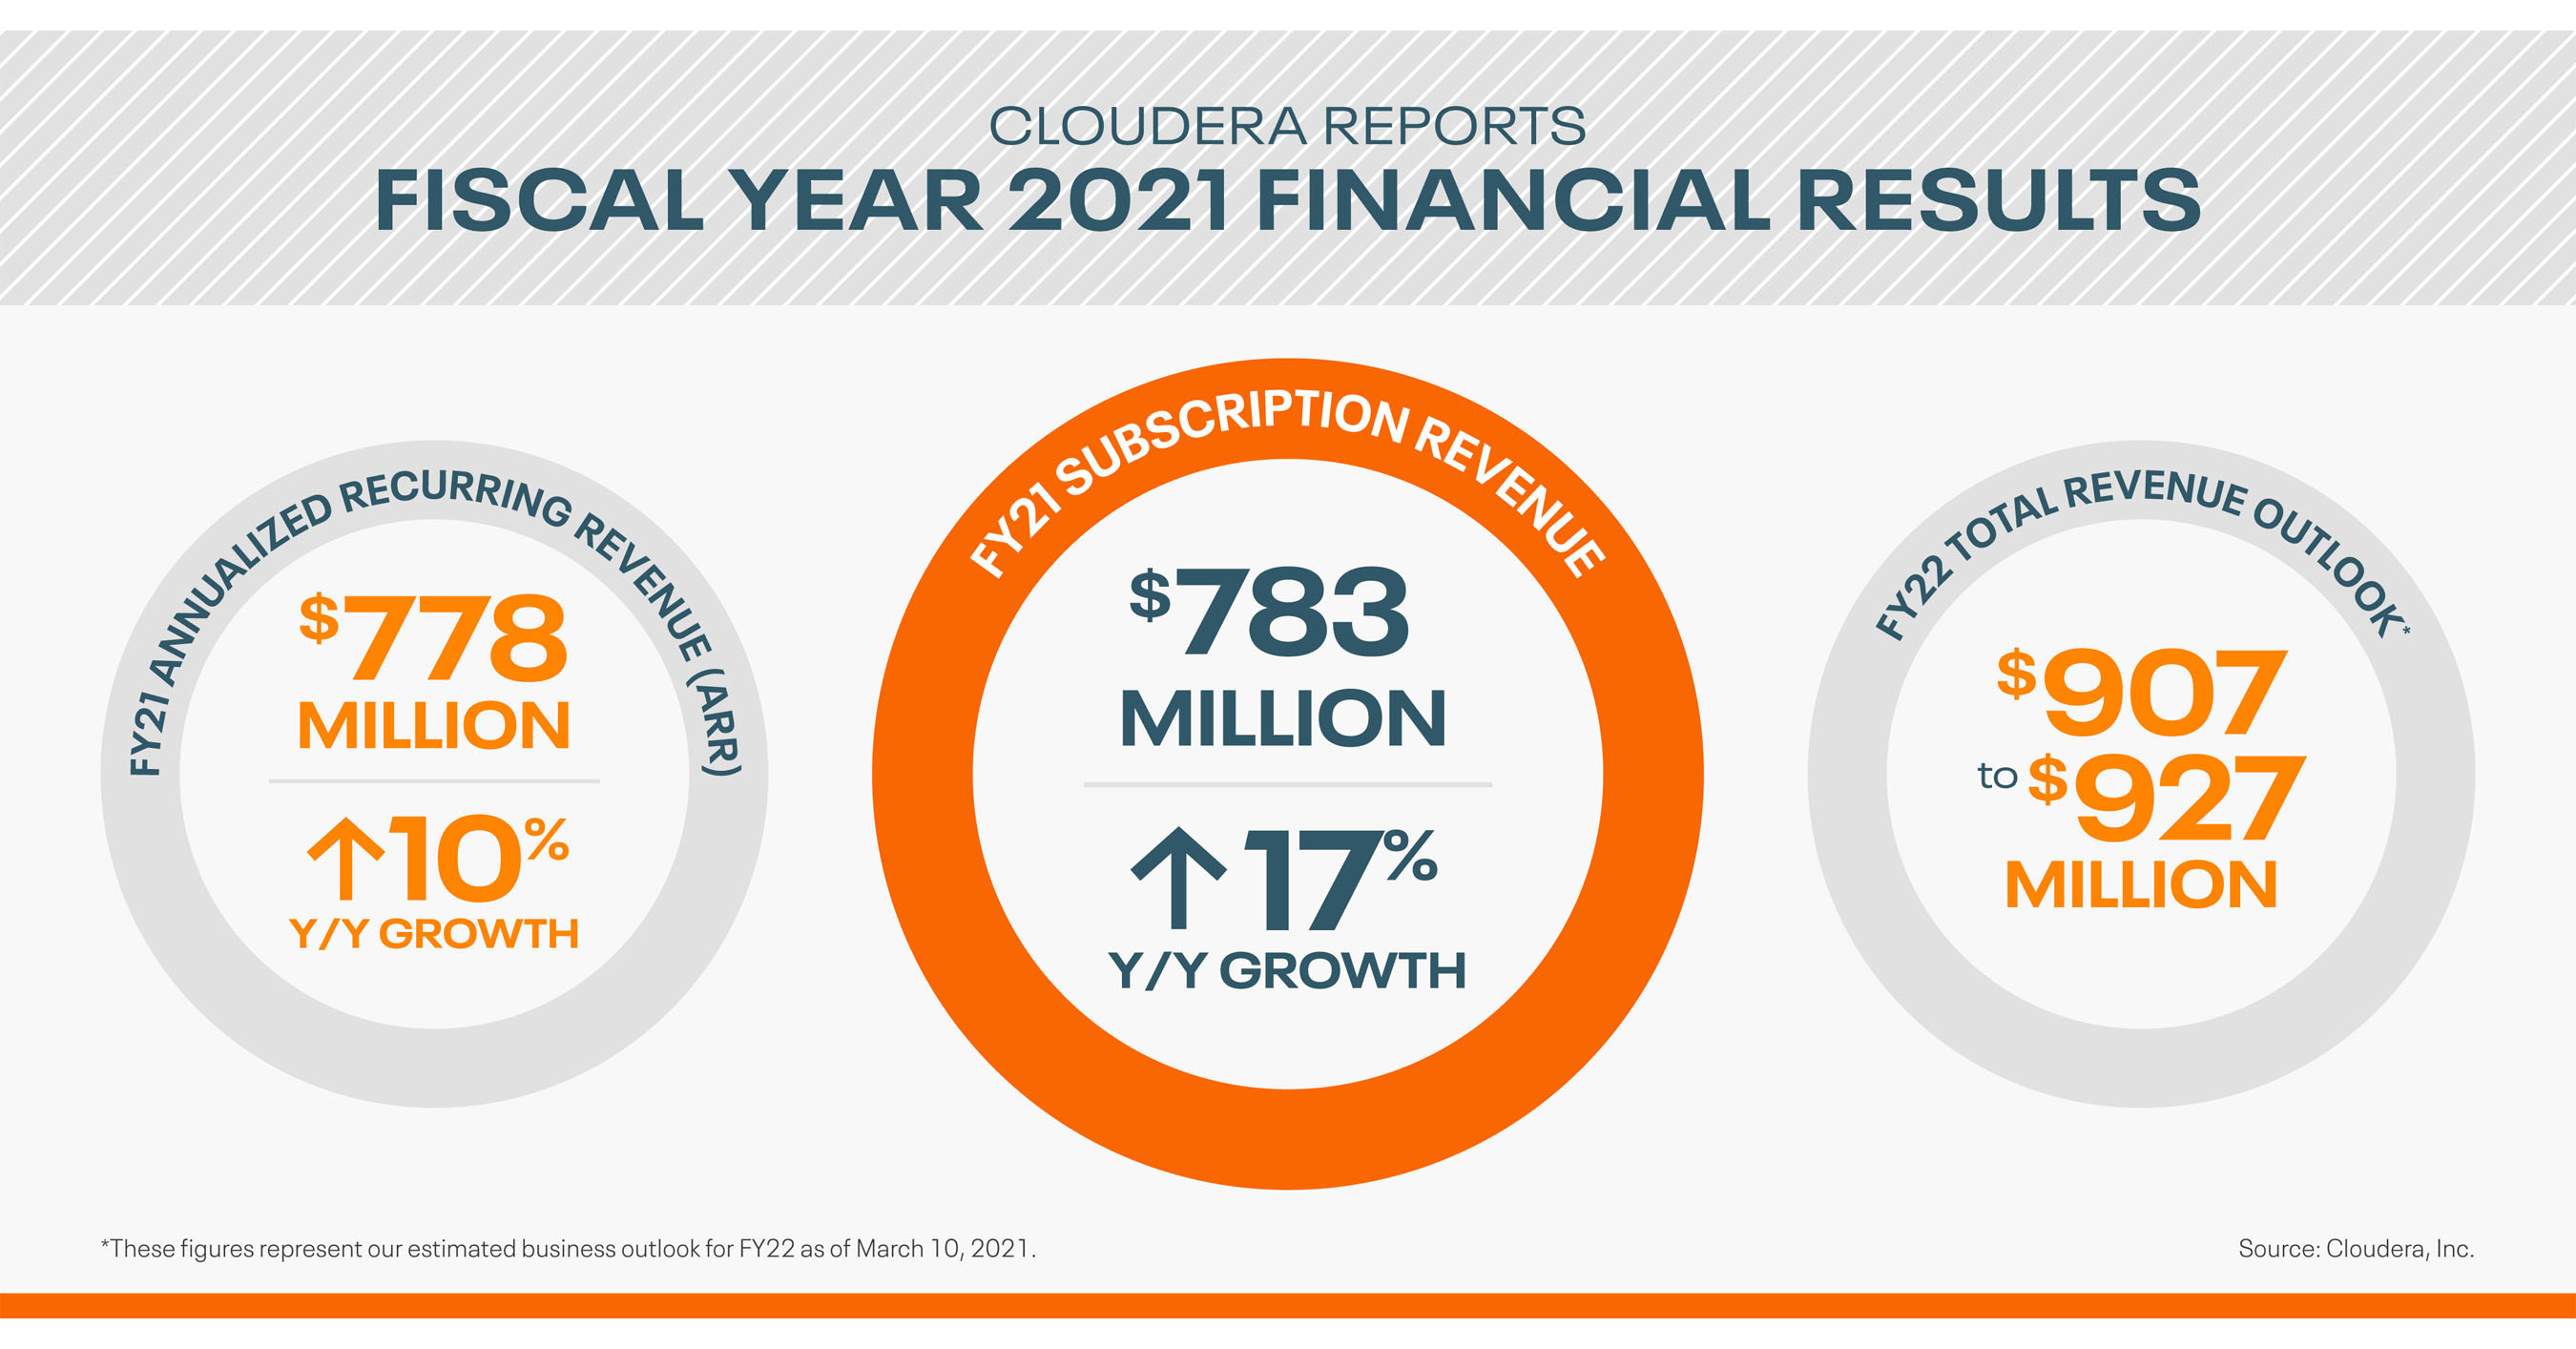 Cloudera Reports Fourth Quarter and Fiscal Year 2021 Financial Results